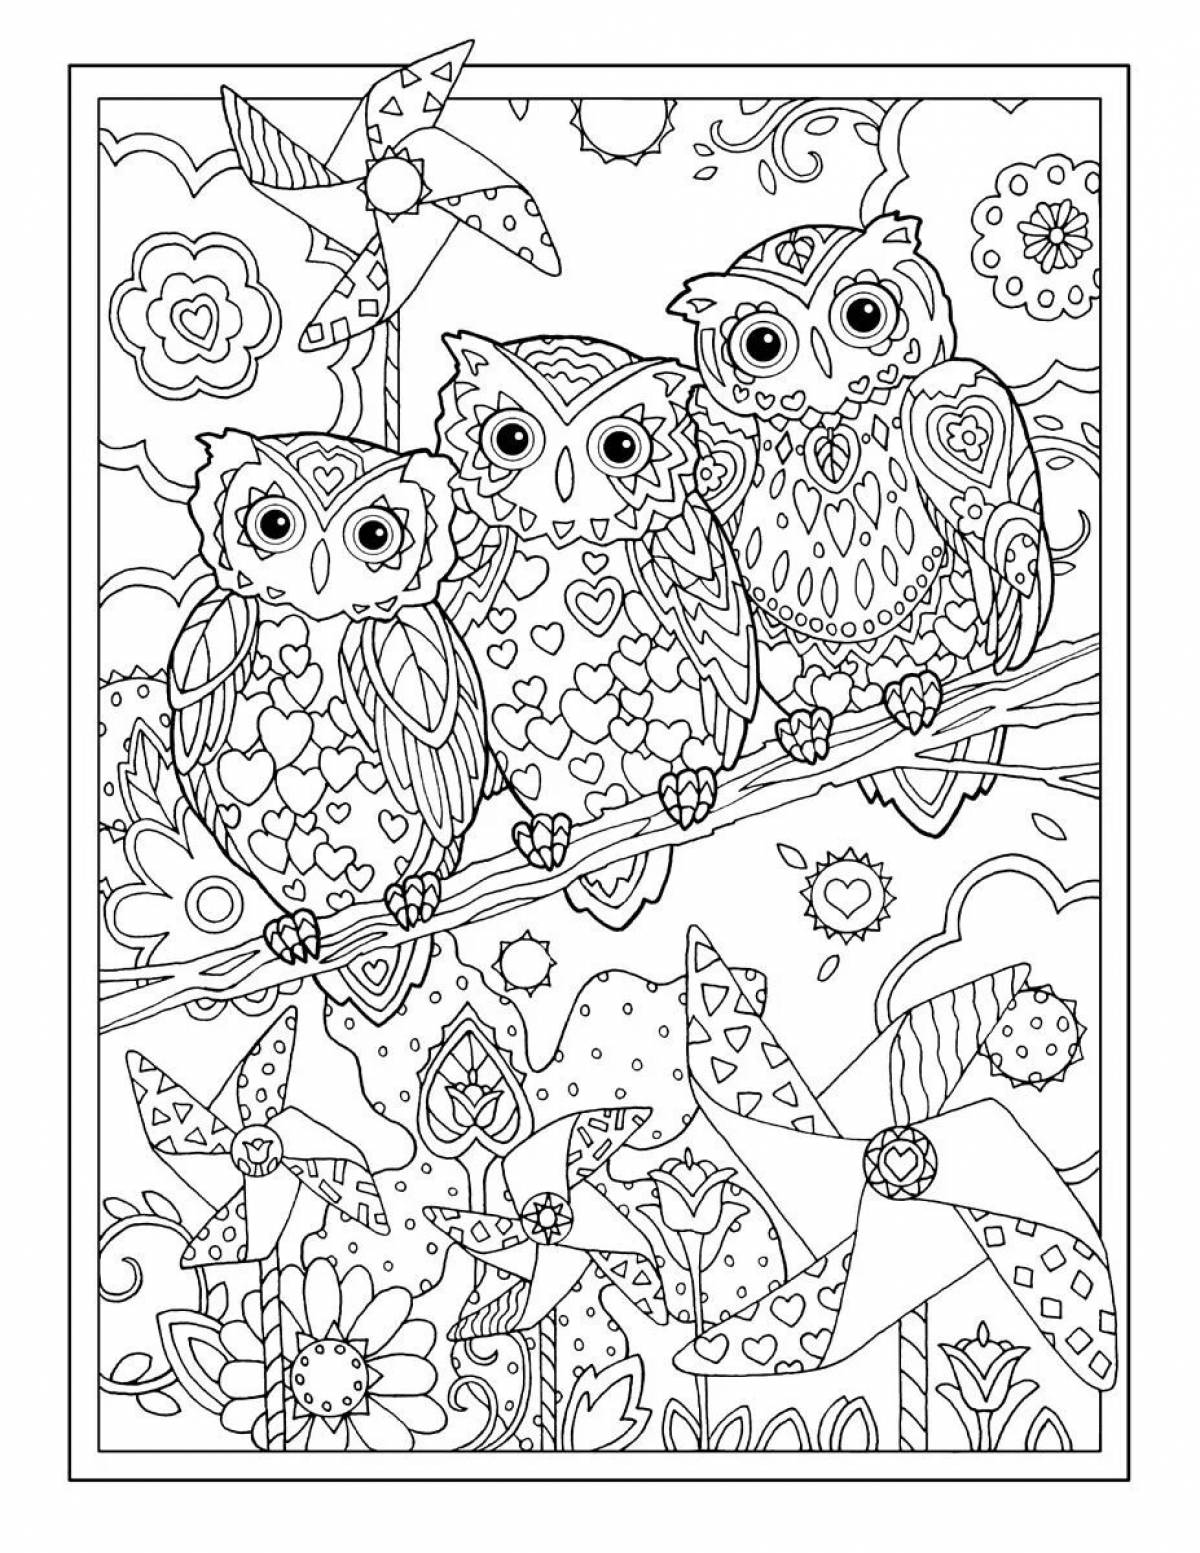 Coloring book funny antistress owls